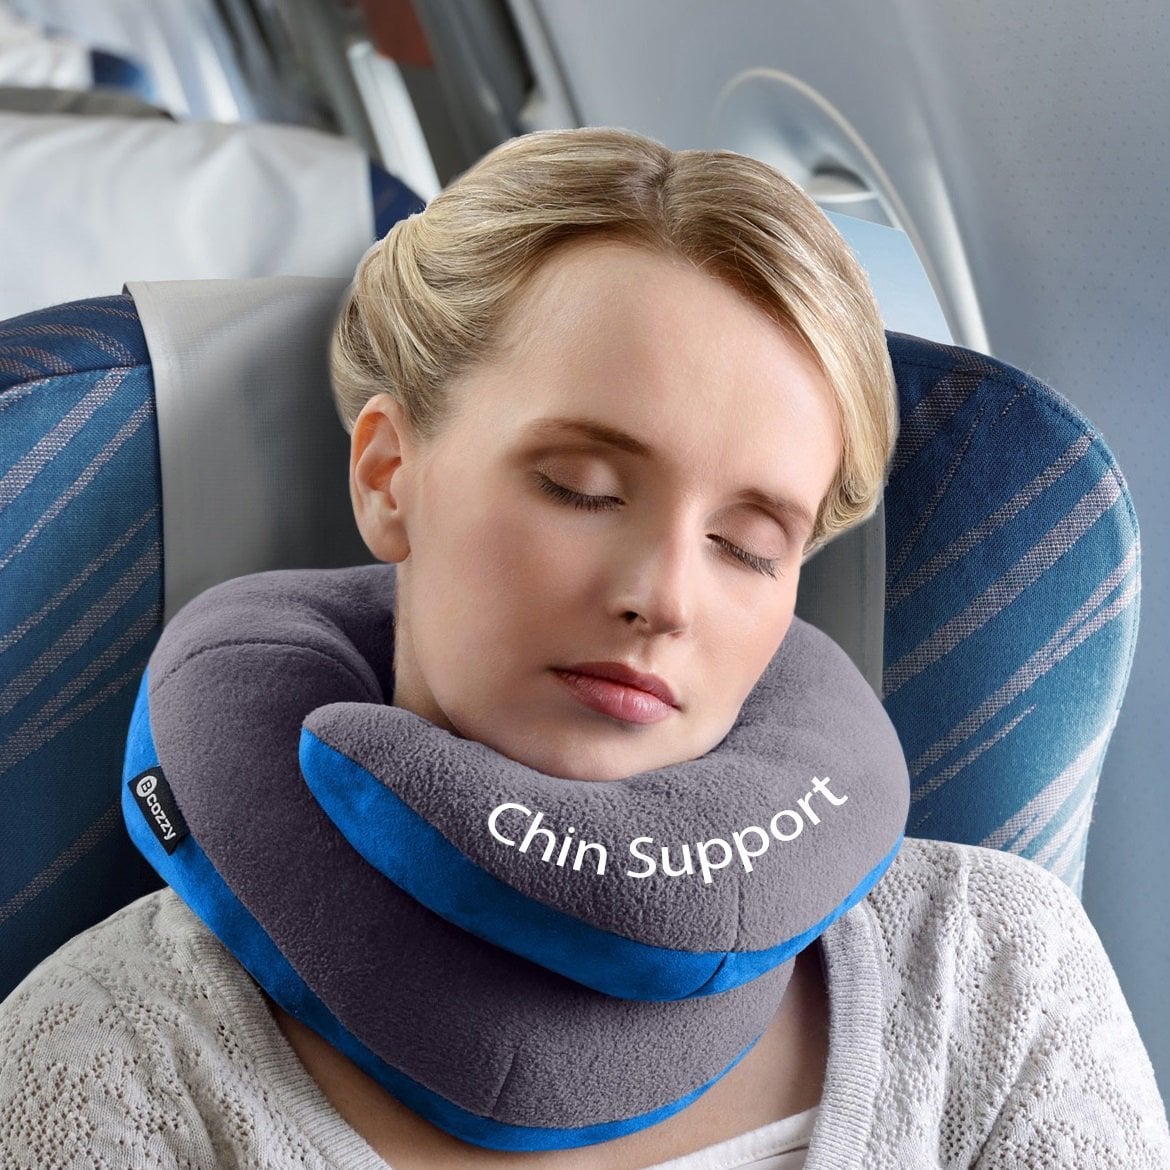 Animal Travel Neck Pillow Soft and Comfy for Home and Travel by Car Train or Plane Koala 